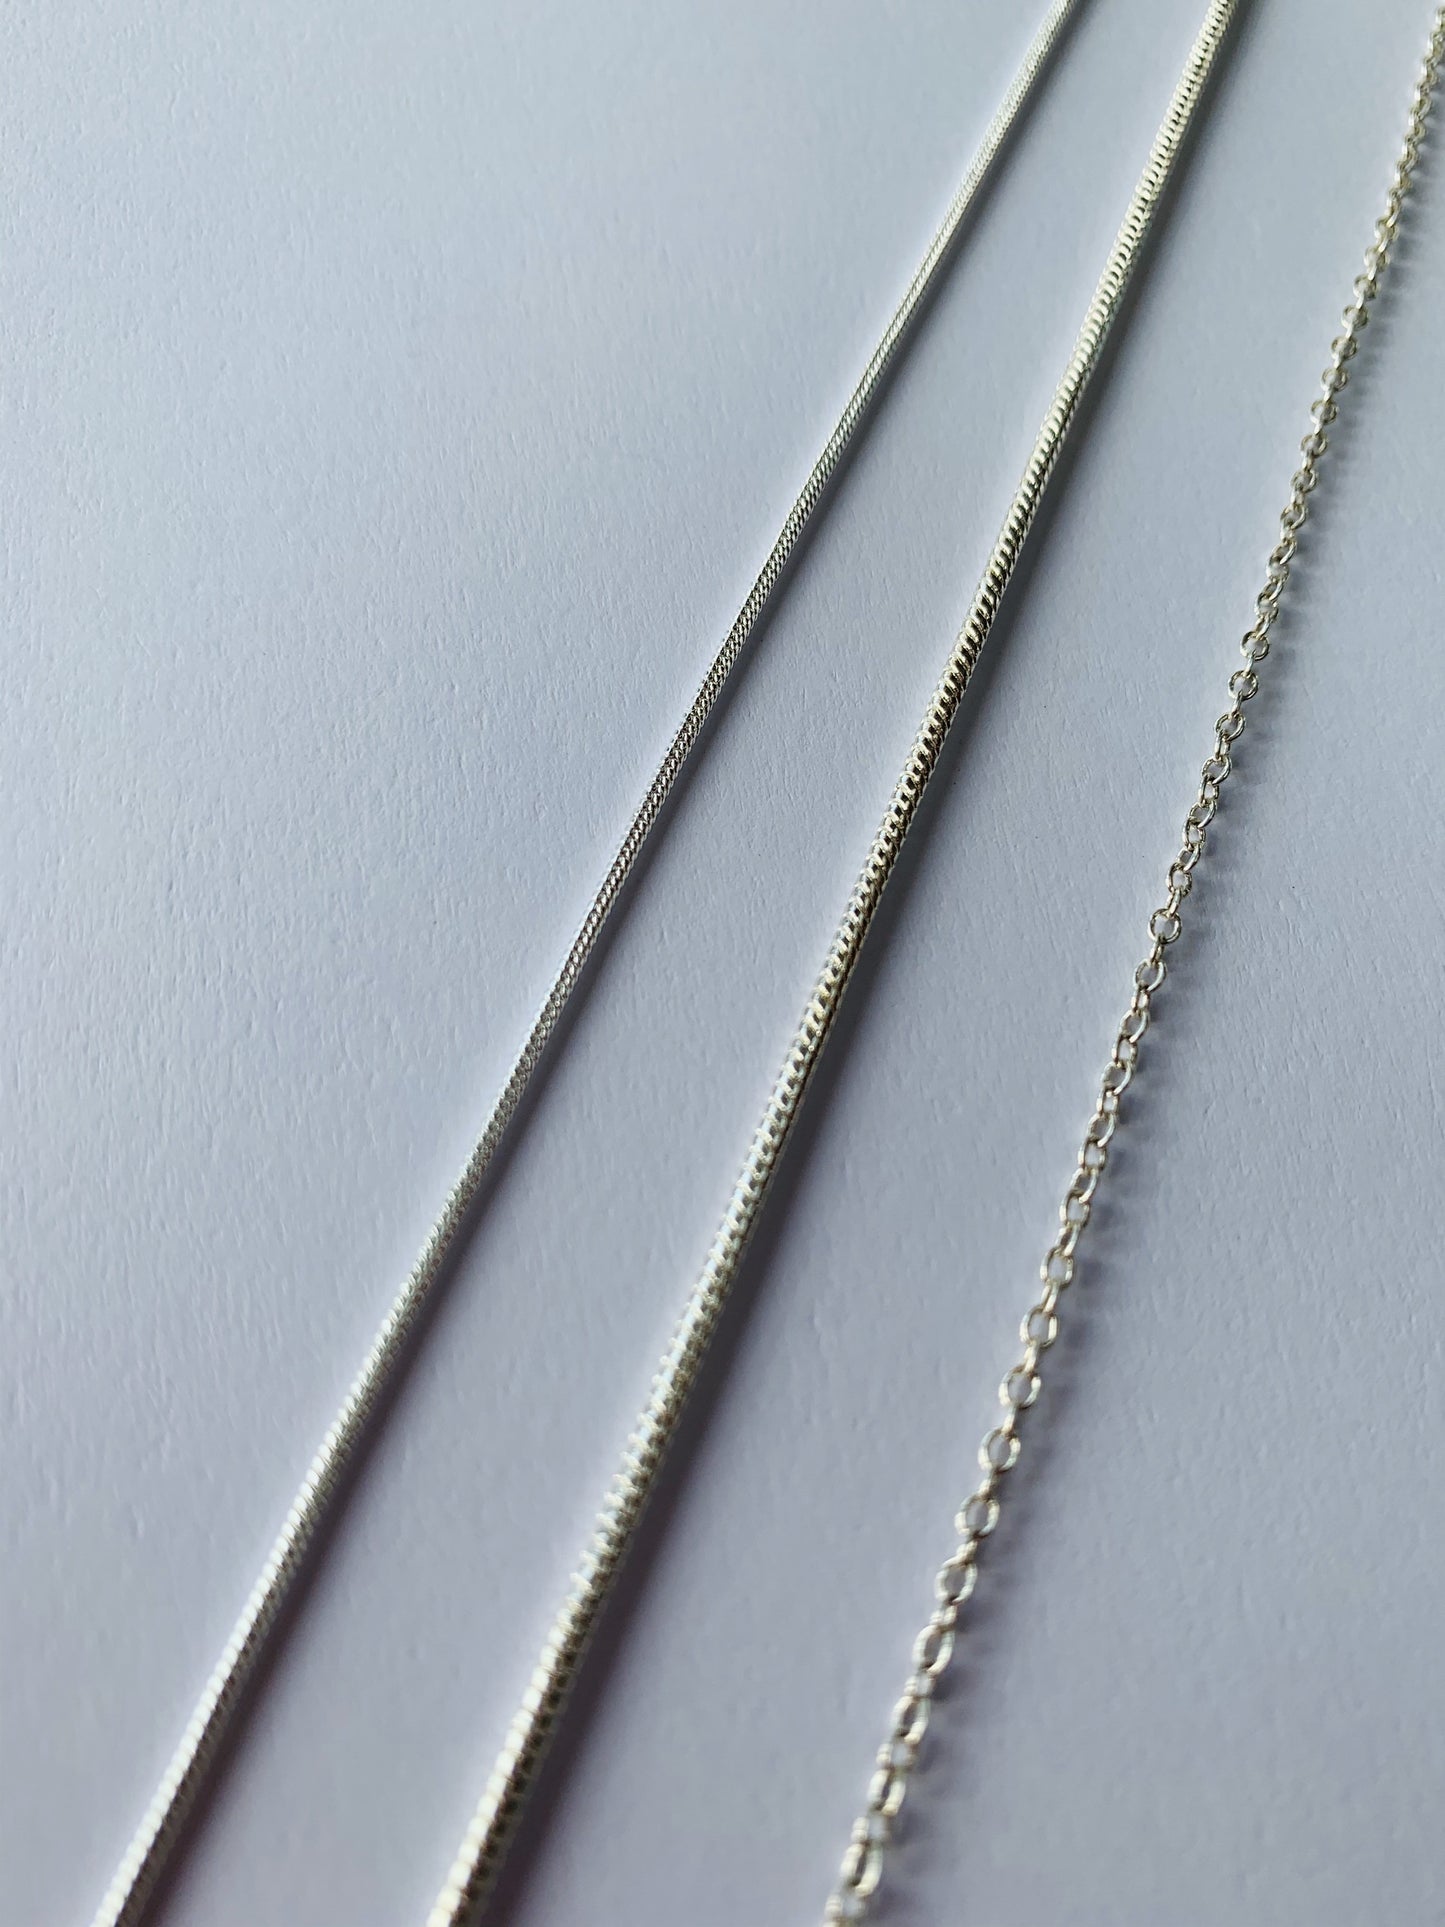 Replacement Necklaces 925 Silver/Leather Corded - Crystal Boutique.co.uk